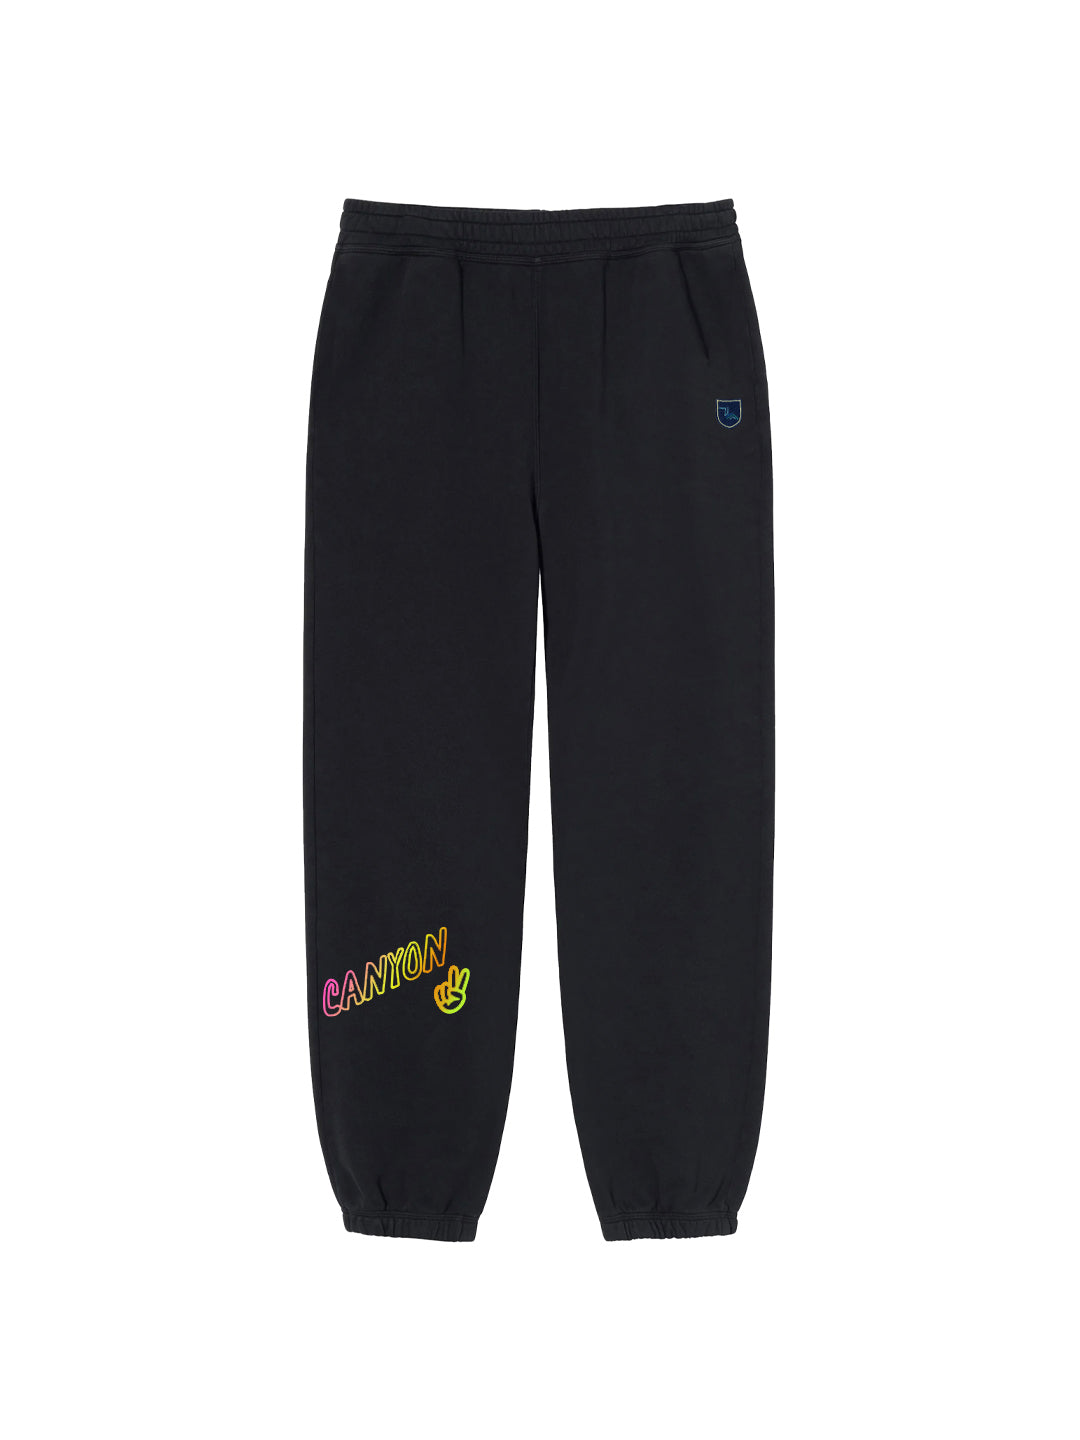 Neon Canyon Charlie Sweatpants in Black